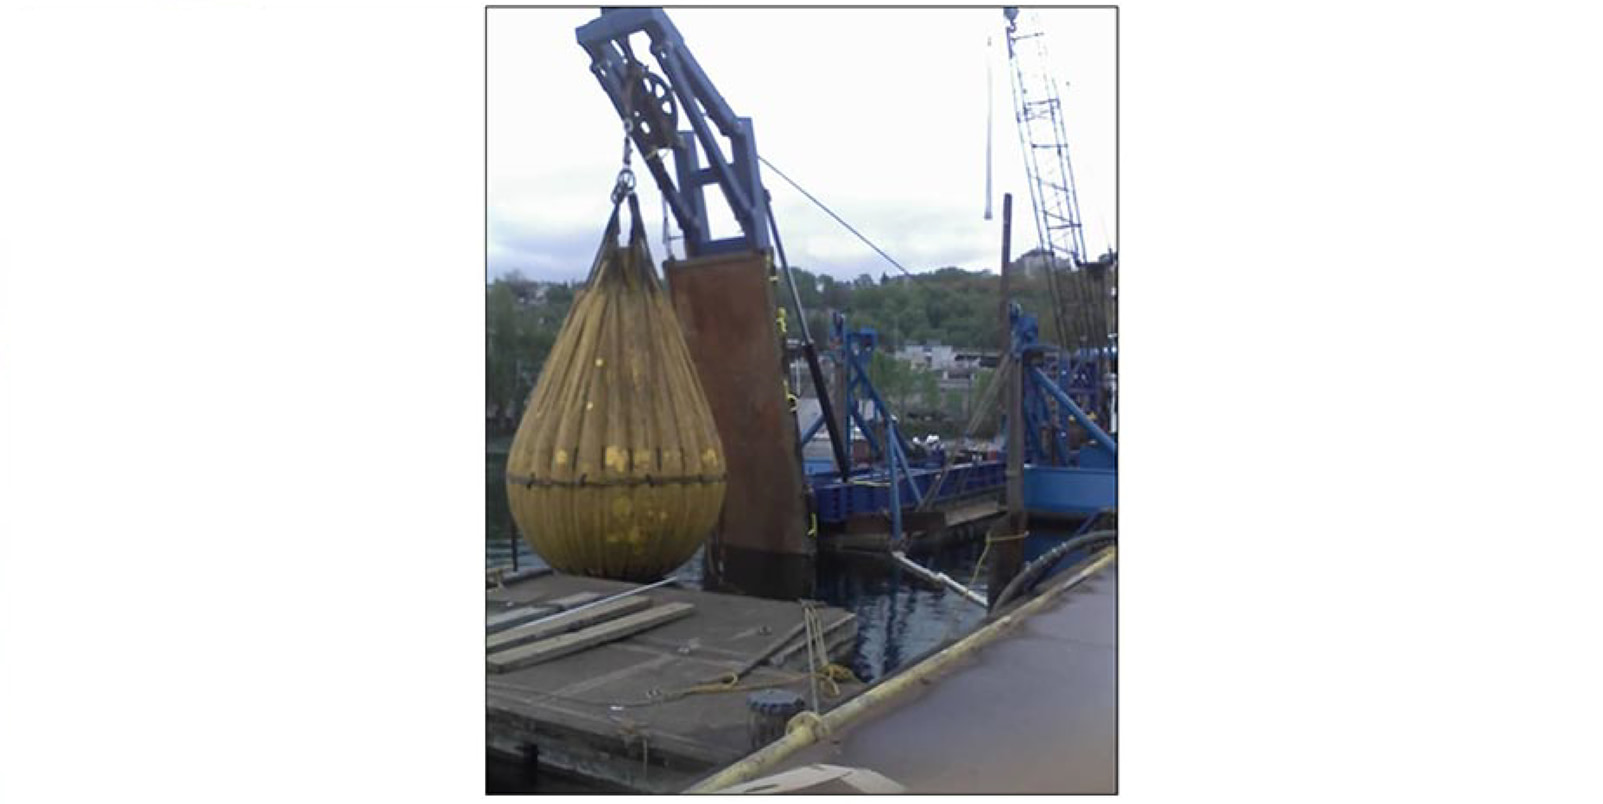 The crane was field tested using a large water filled bag.  It passed with no problems and is now in service somewhere around the world.